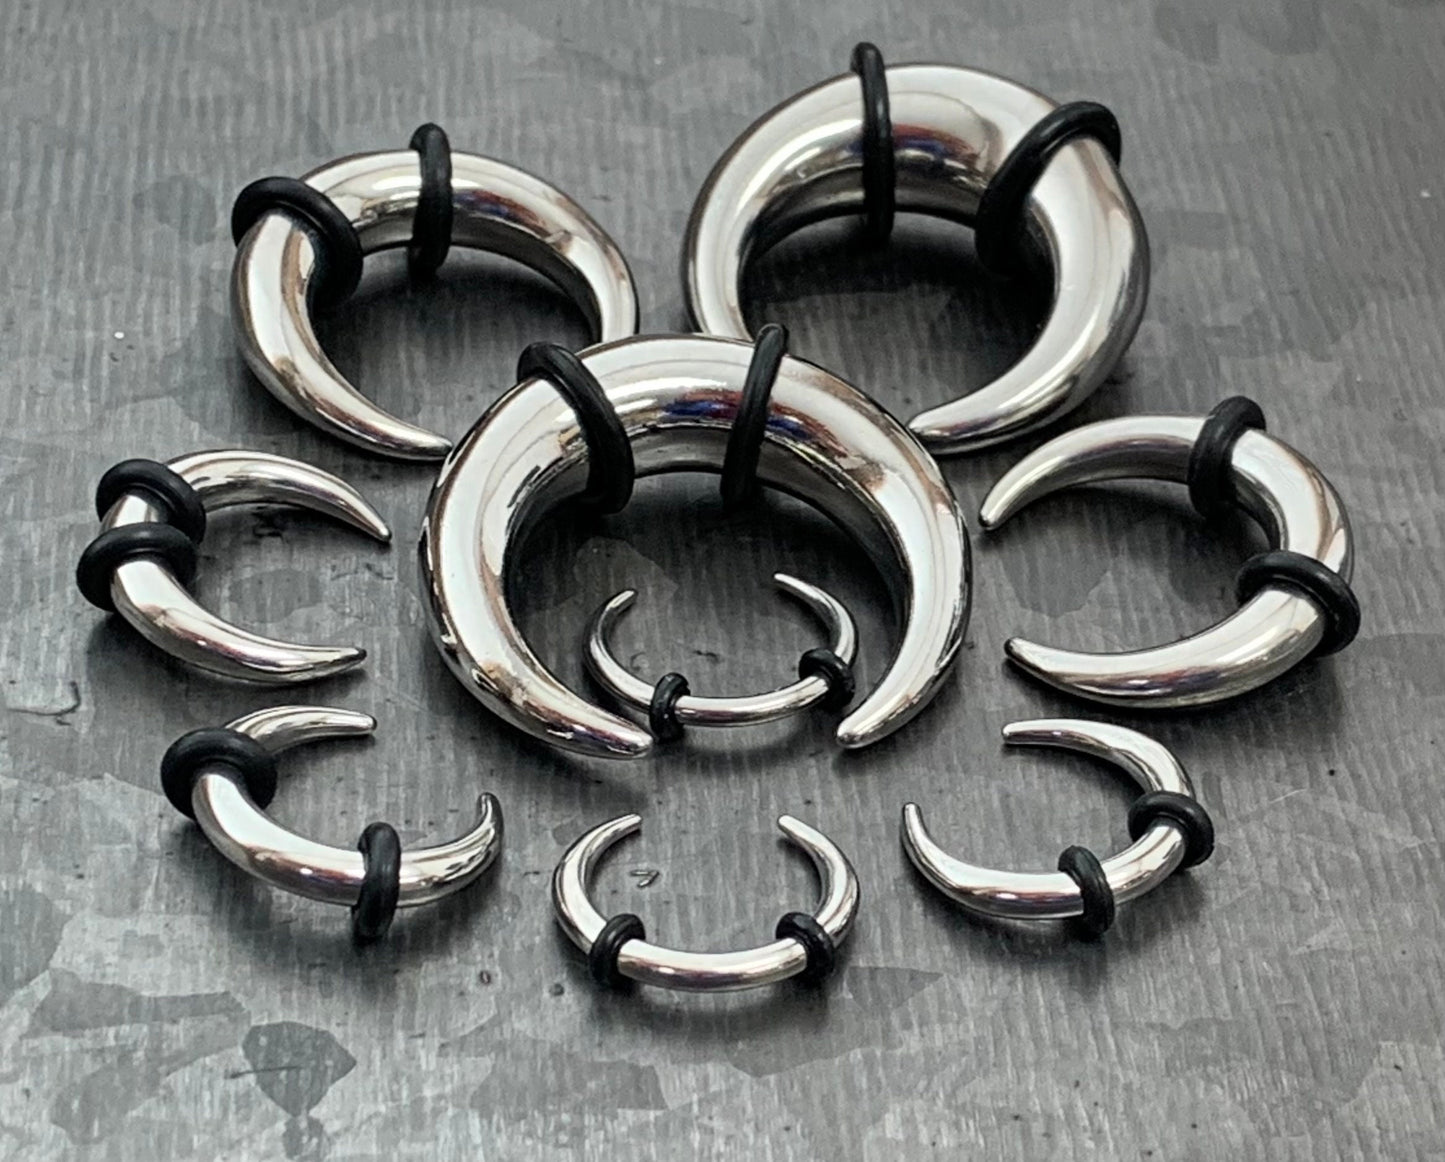 1 PIECE Solid 316L Surgical Steel Septum Ring / Buffalo Taper with O-Rings - Expander- Gauges 14g (1.6mm) thru 00g (10mm) Available!